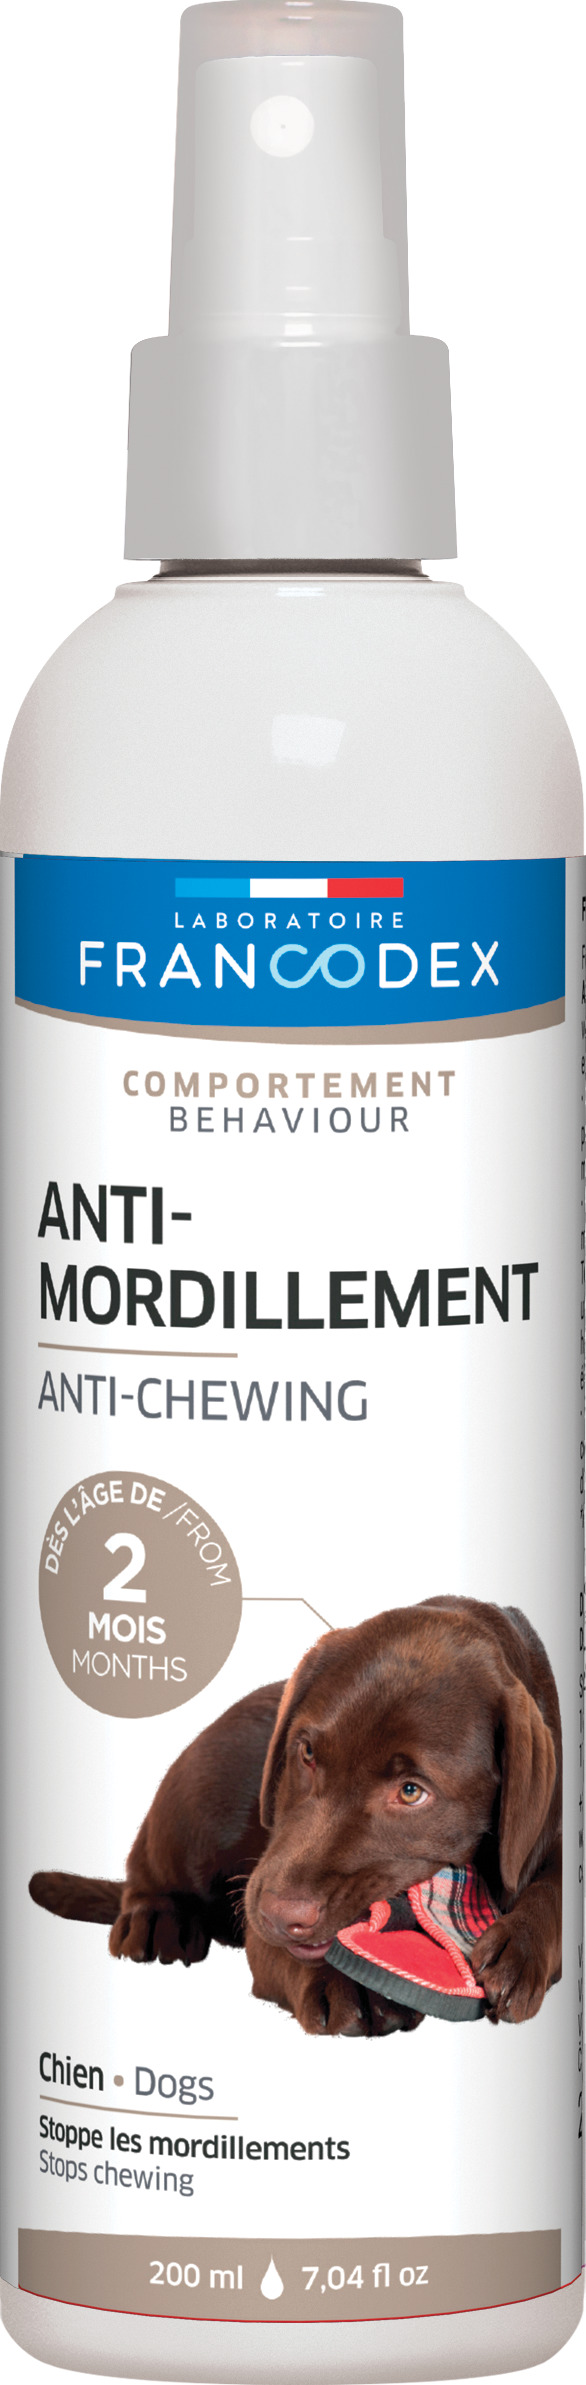 Shampoing anti-démangeaisons pour chiens 250ml Francodex